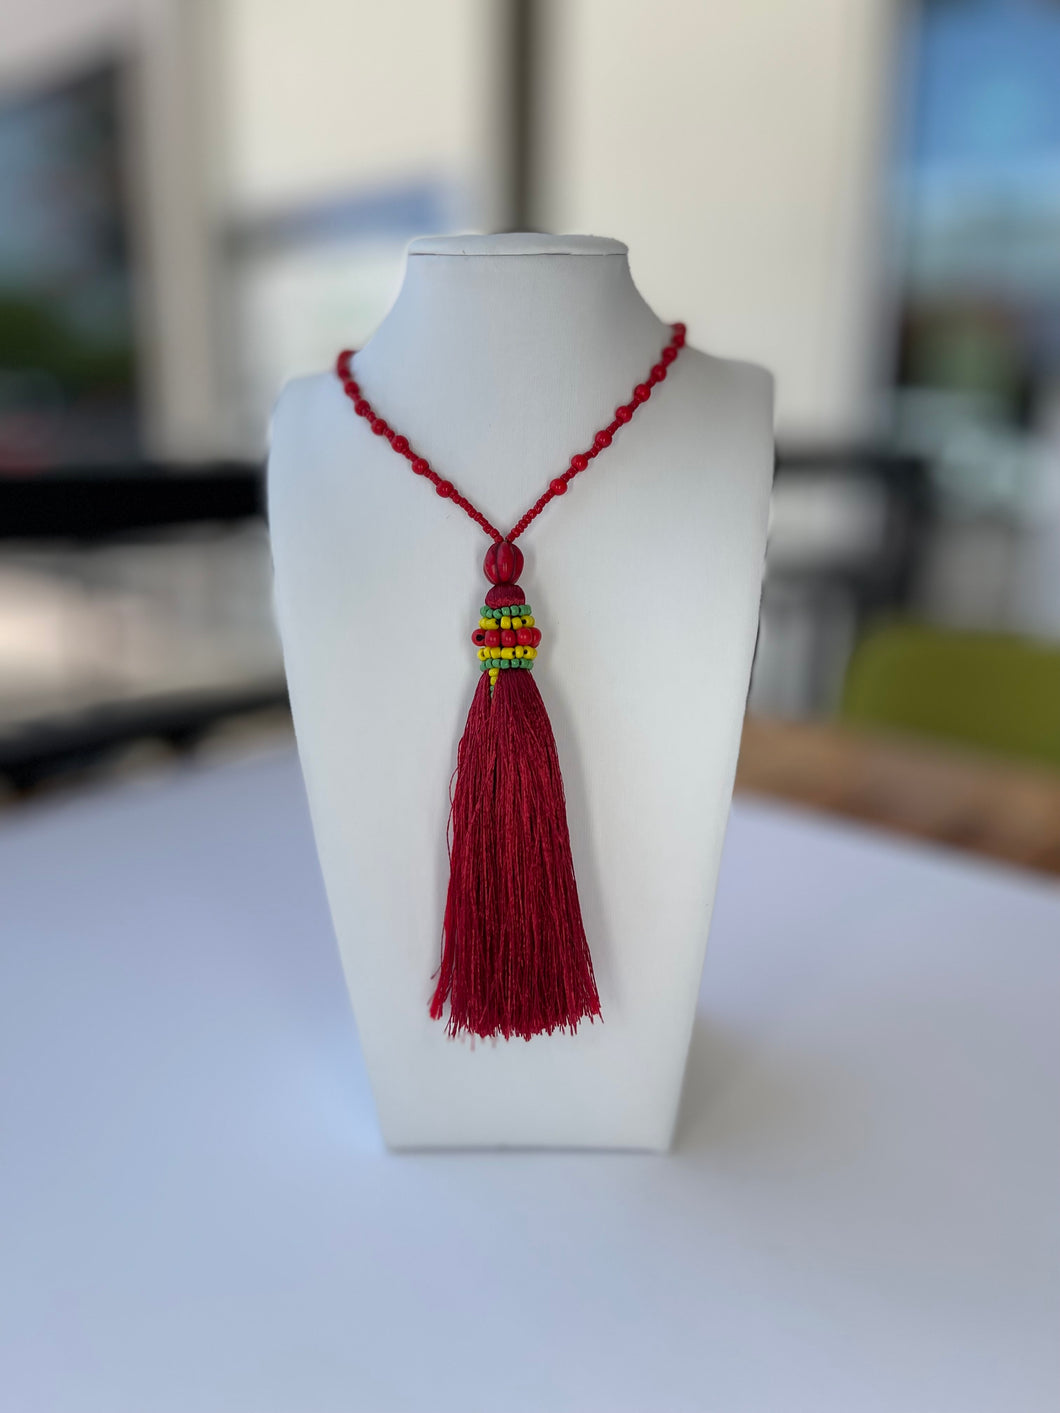 Handcraft necklaces from Thailand (N35-17)